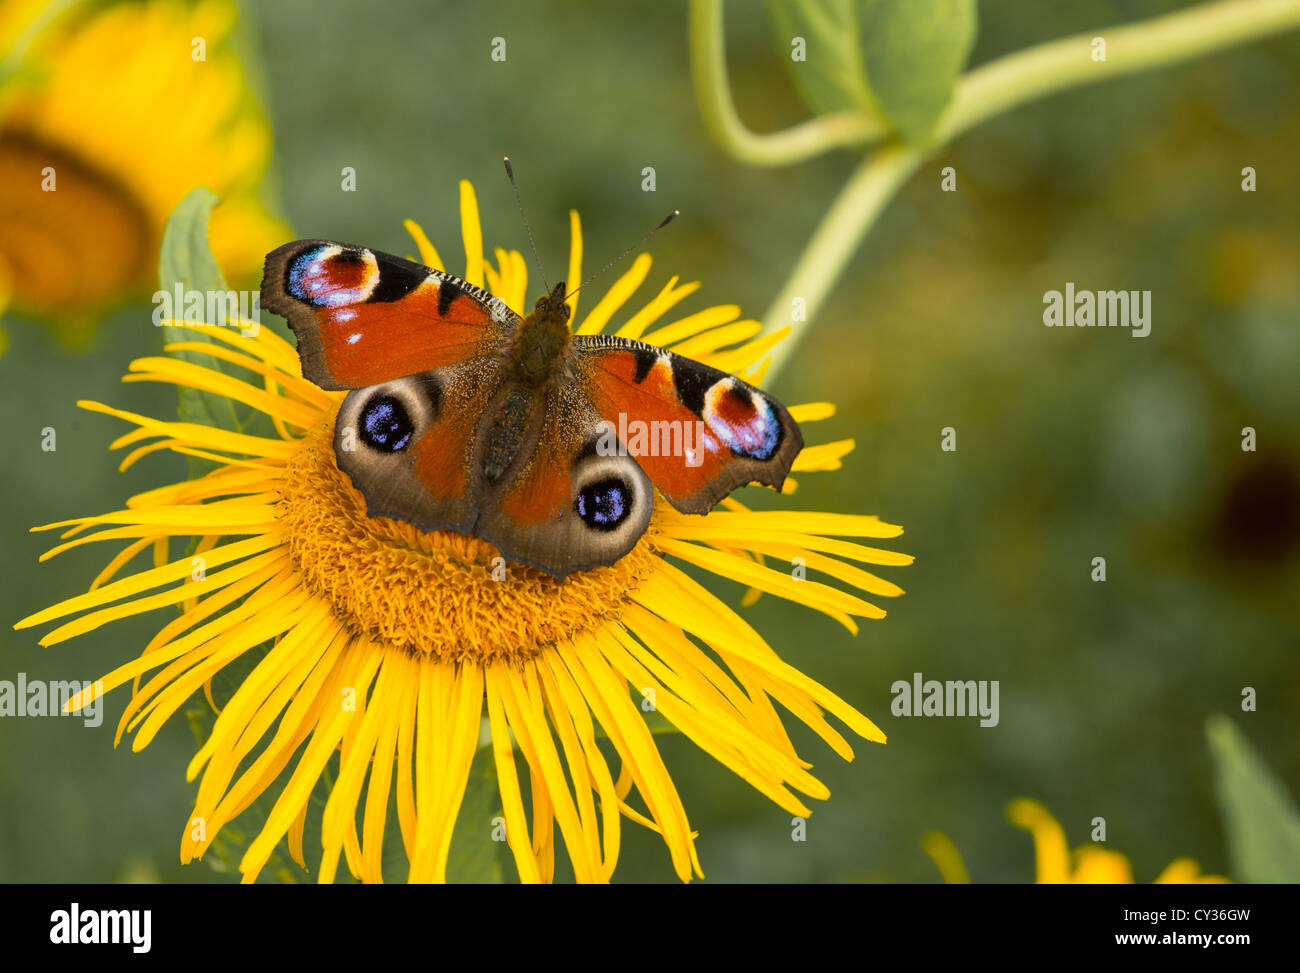 European Peacock Butterfly on a yellow aster Stock Photo